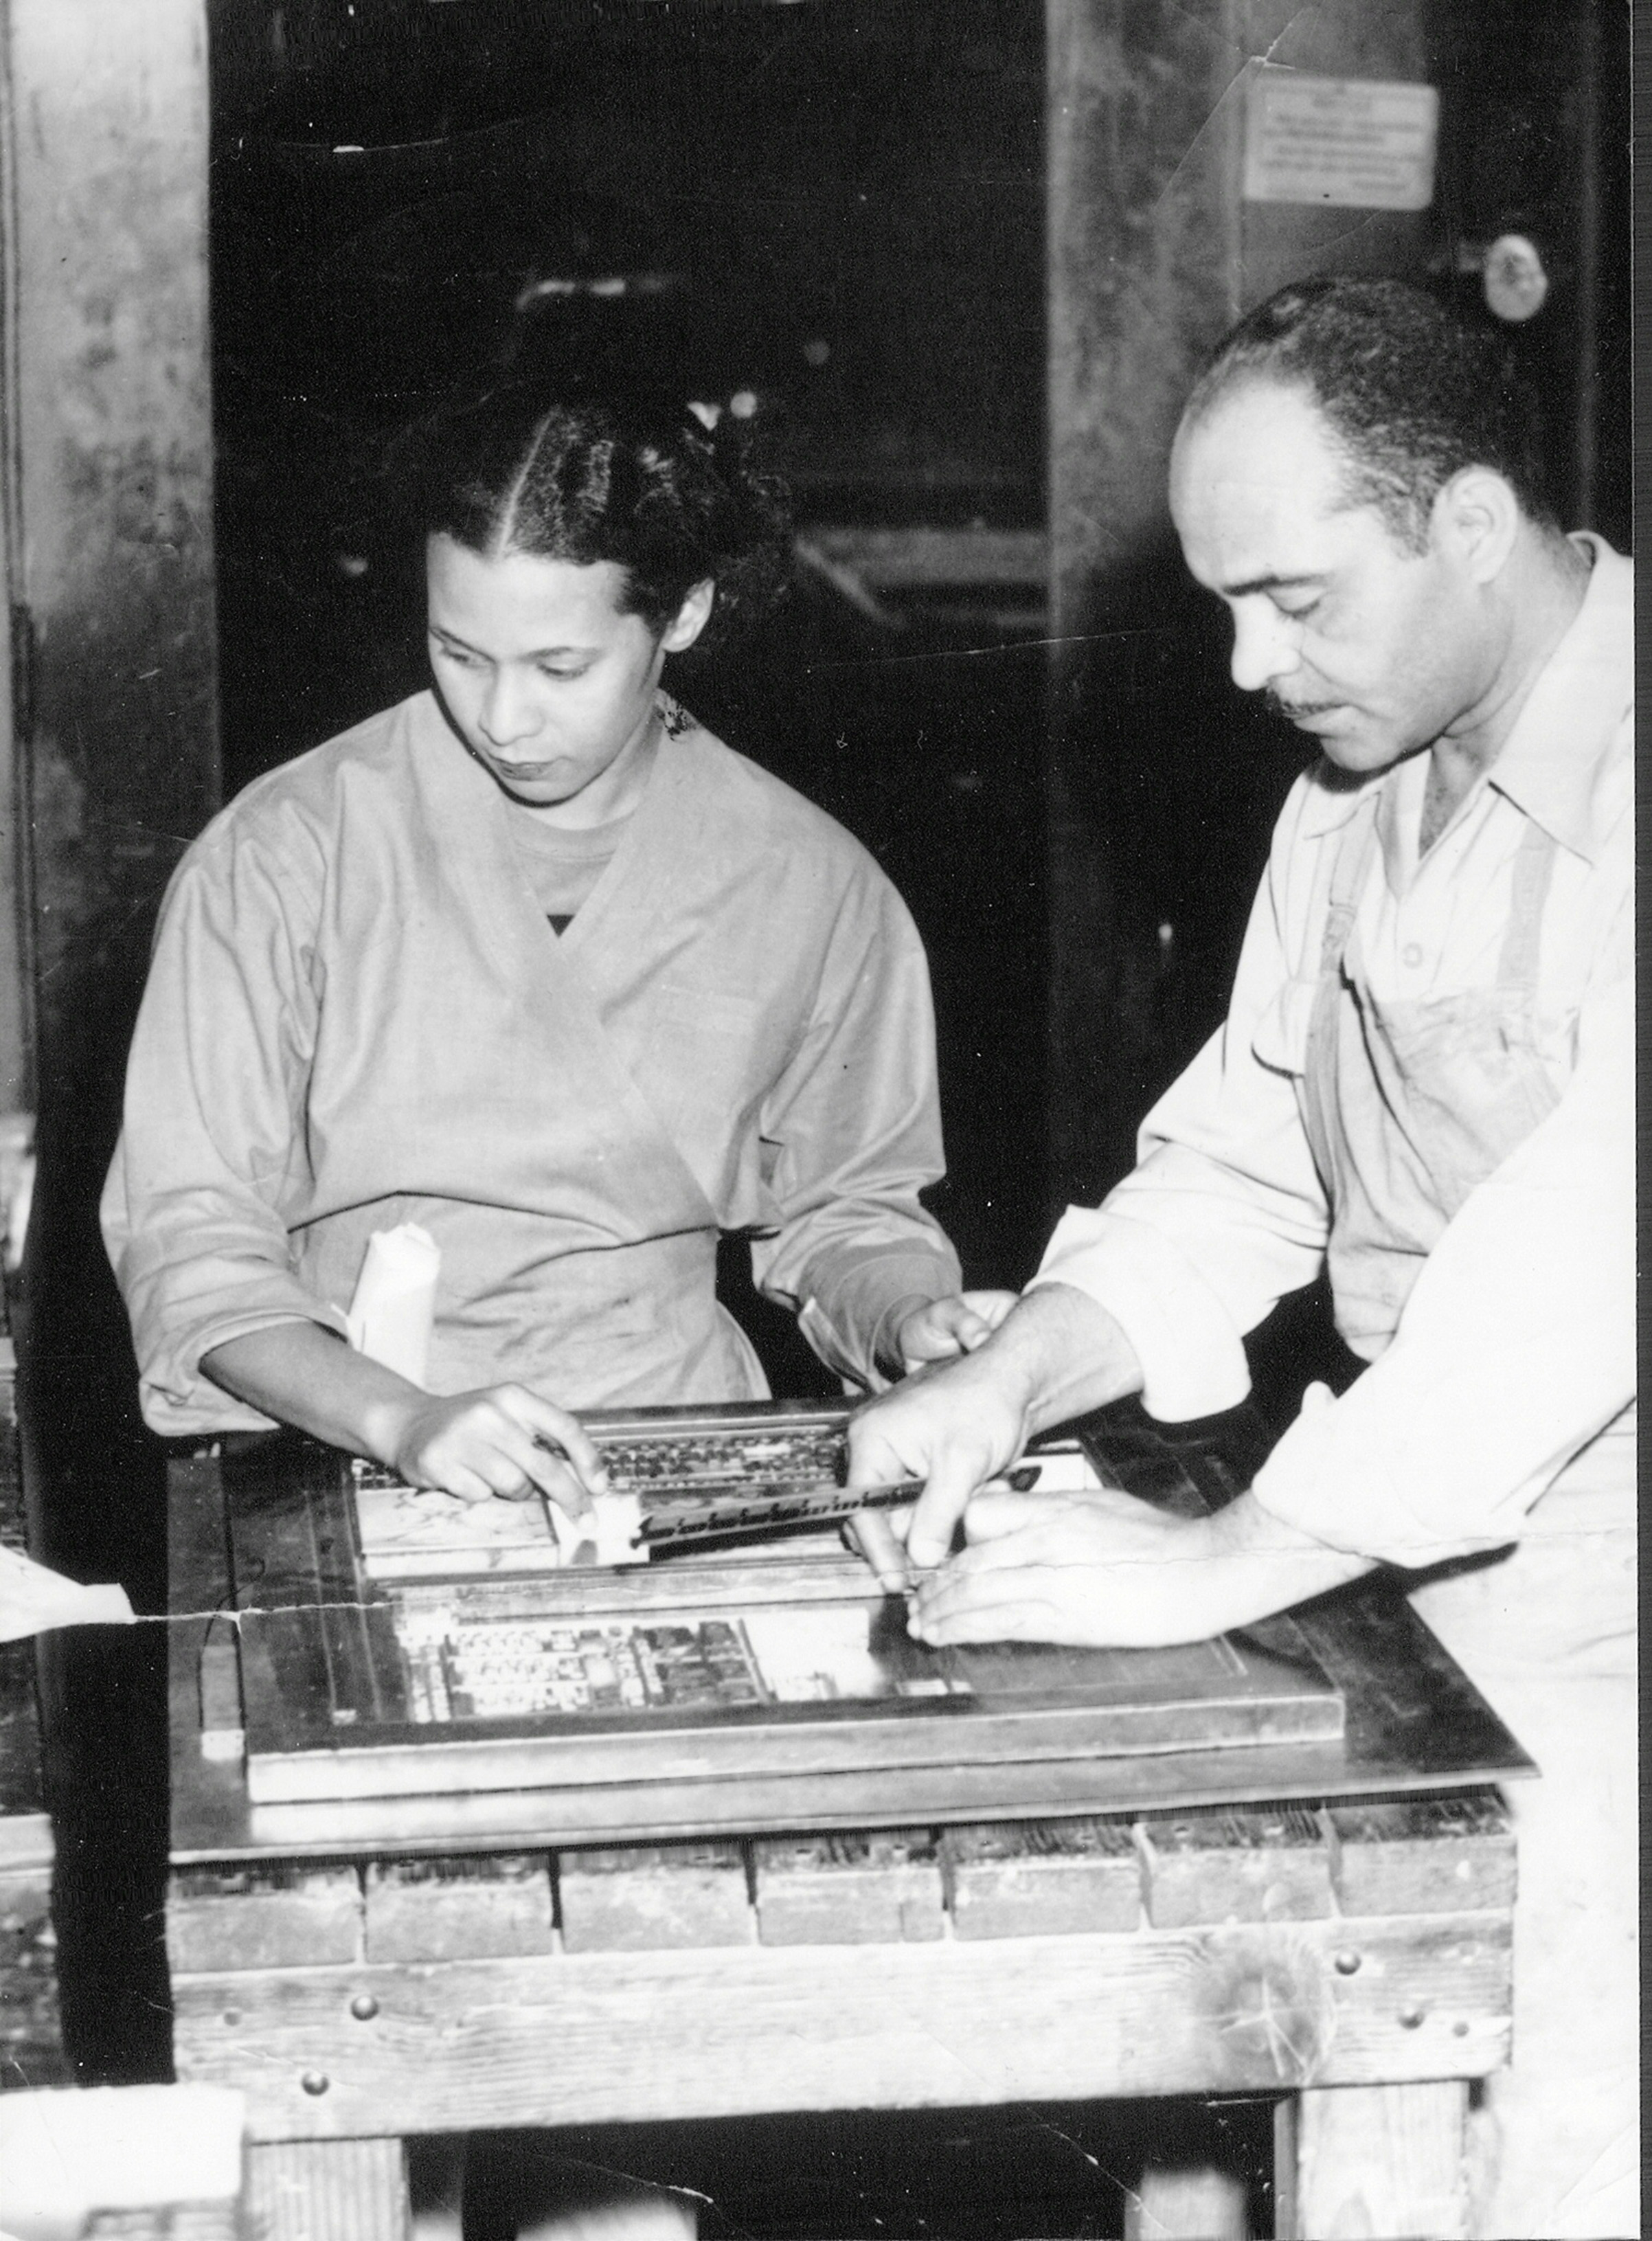 A circa 1950s photo of publishers of the Los Angeles <i>Tribune</i> Lucius and Almena Lomax, parents of Michael Lomax, setting the typeface to print the newspaper. (Courtesy of the Lomax Family)